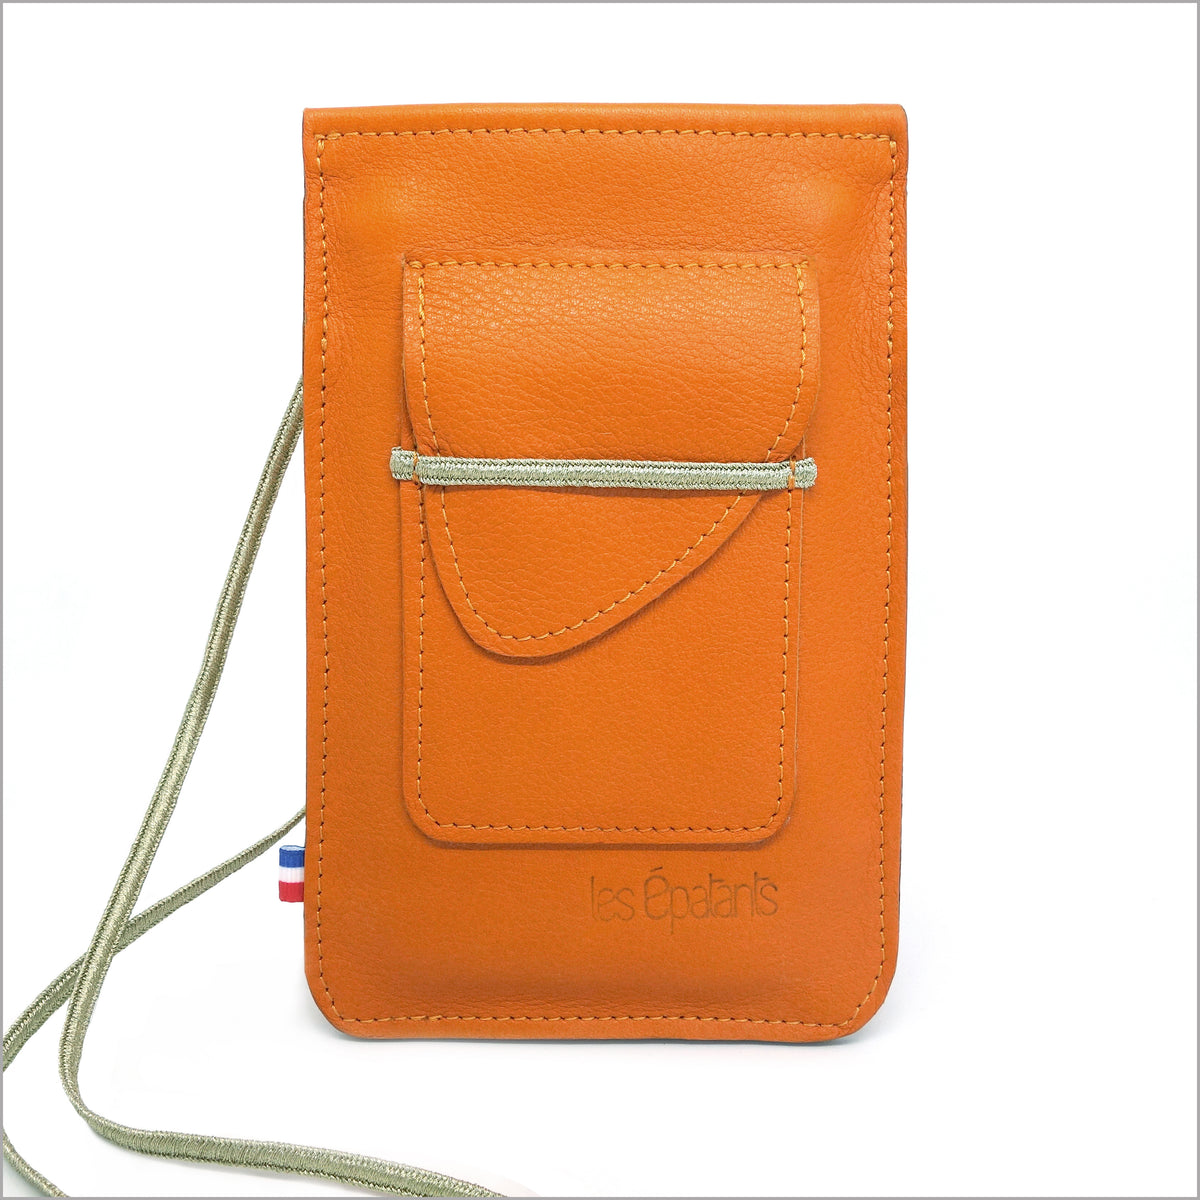 Orange leather phone pouch with adjustable shoulder strap